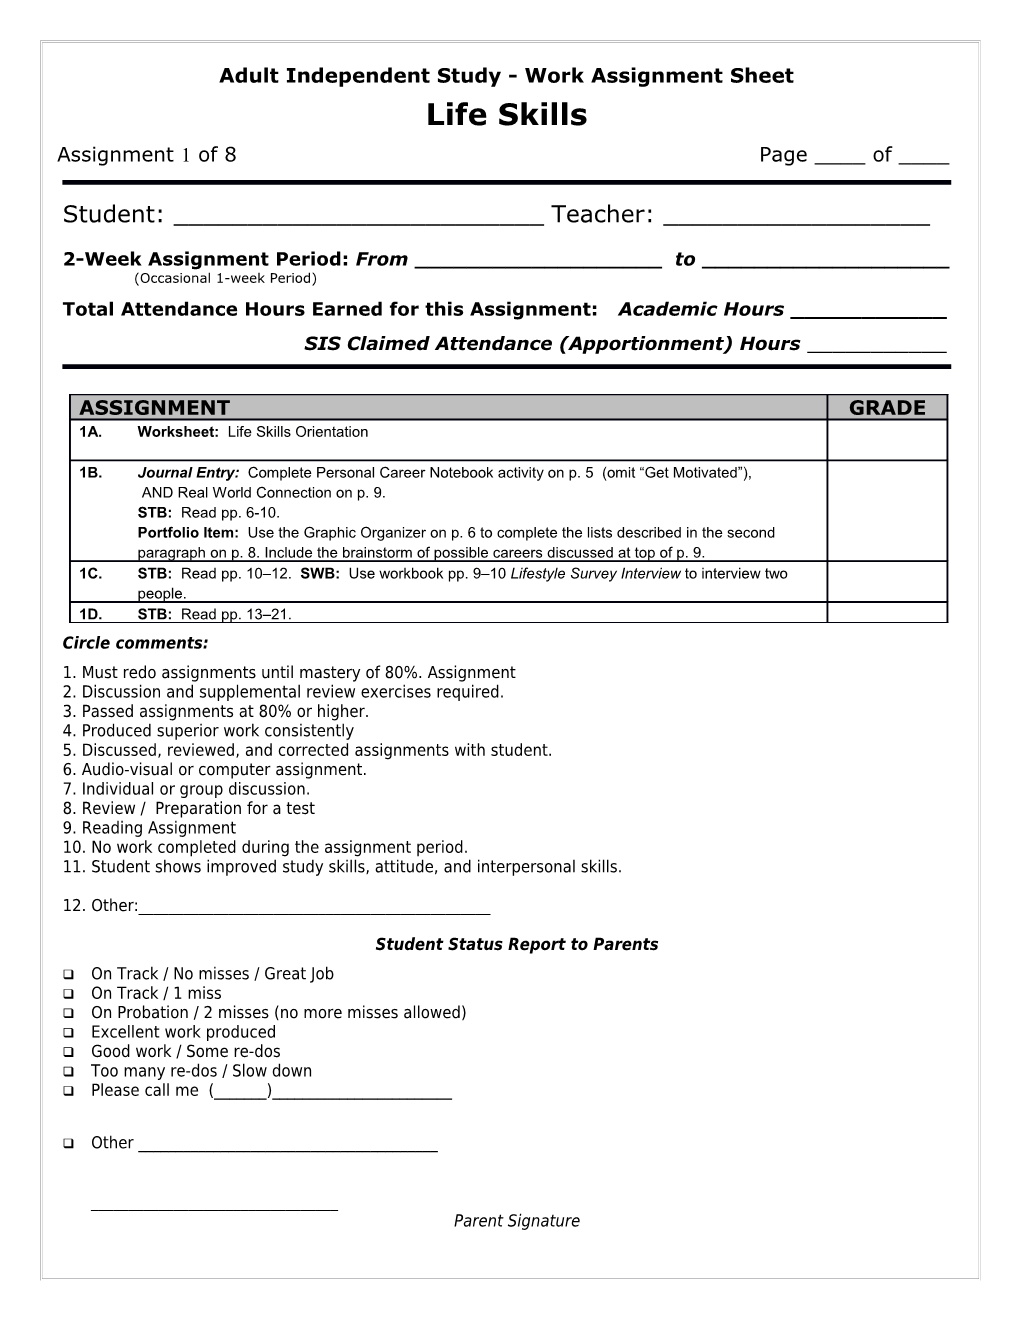 Adult Independent Study - Work Assignment Sheet Life Skills